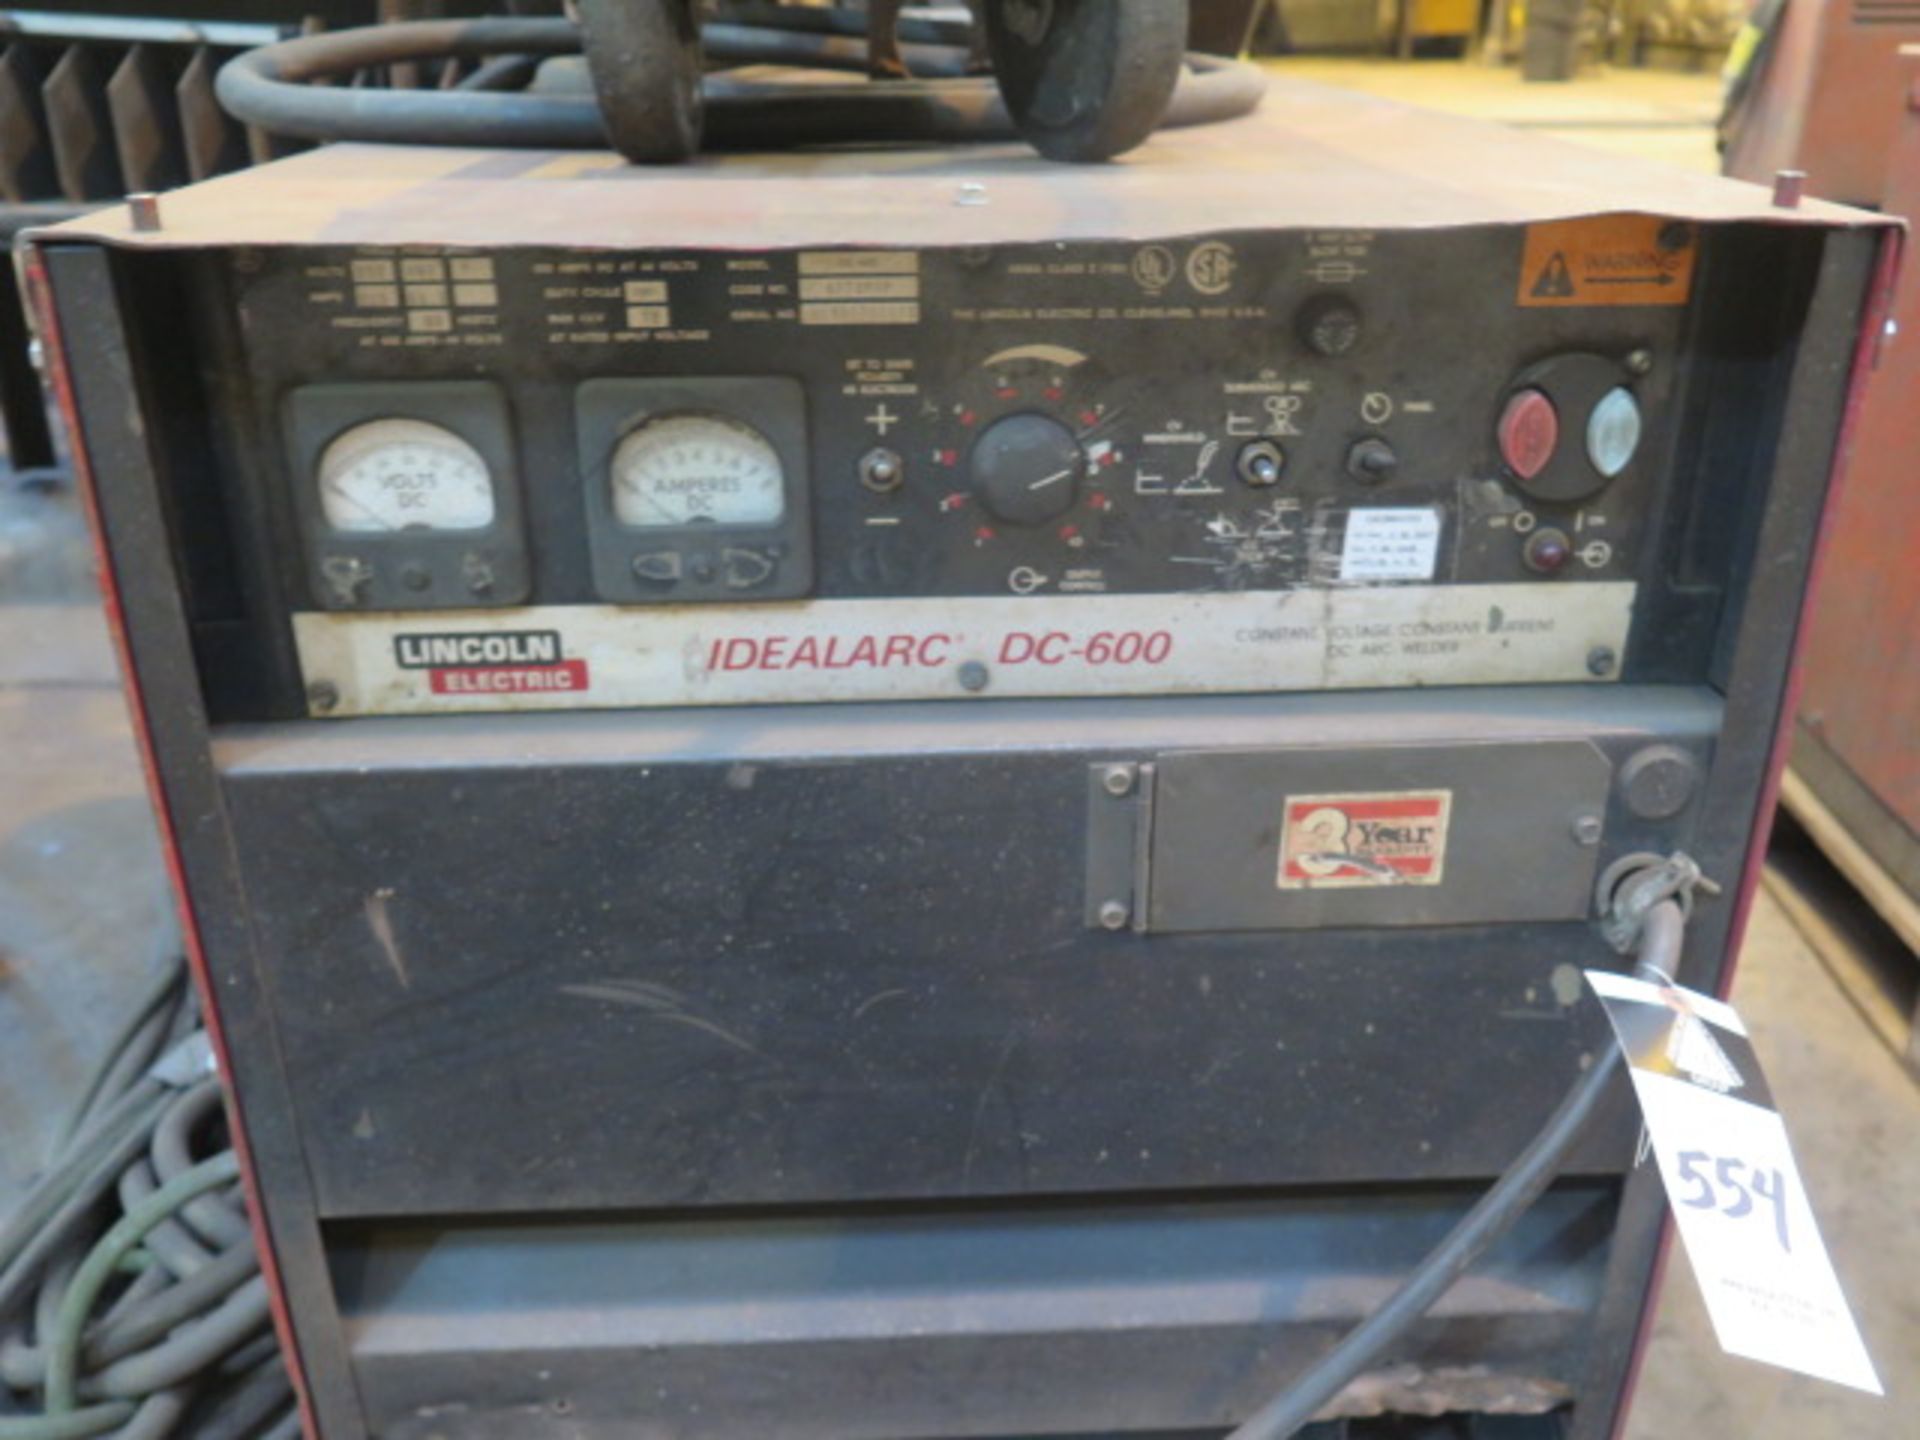 Lincoln Idealarc DC-600 VV-CV DC Arc Welding Power Source w/ Lincoln LN-7 Wire Feeder - Image 4 of 4